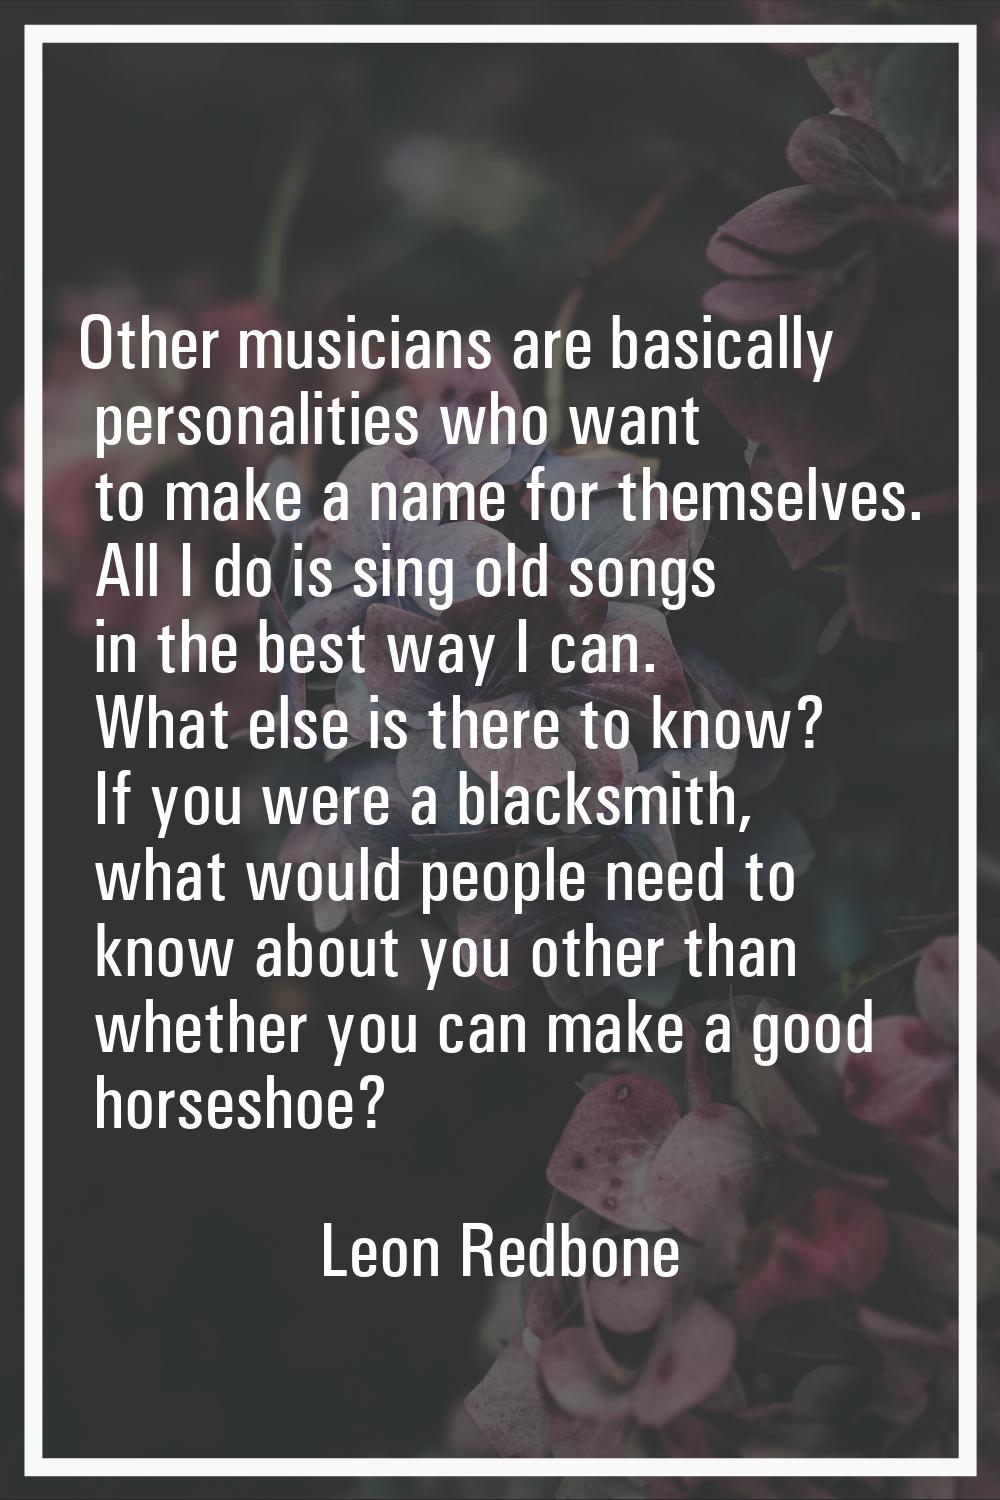 Other musicians are basically personalities who want to make a name for themselves. All I do is sin